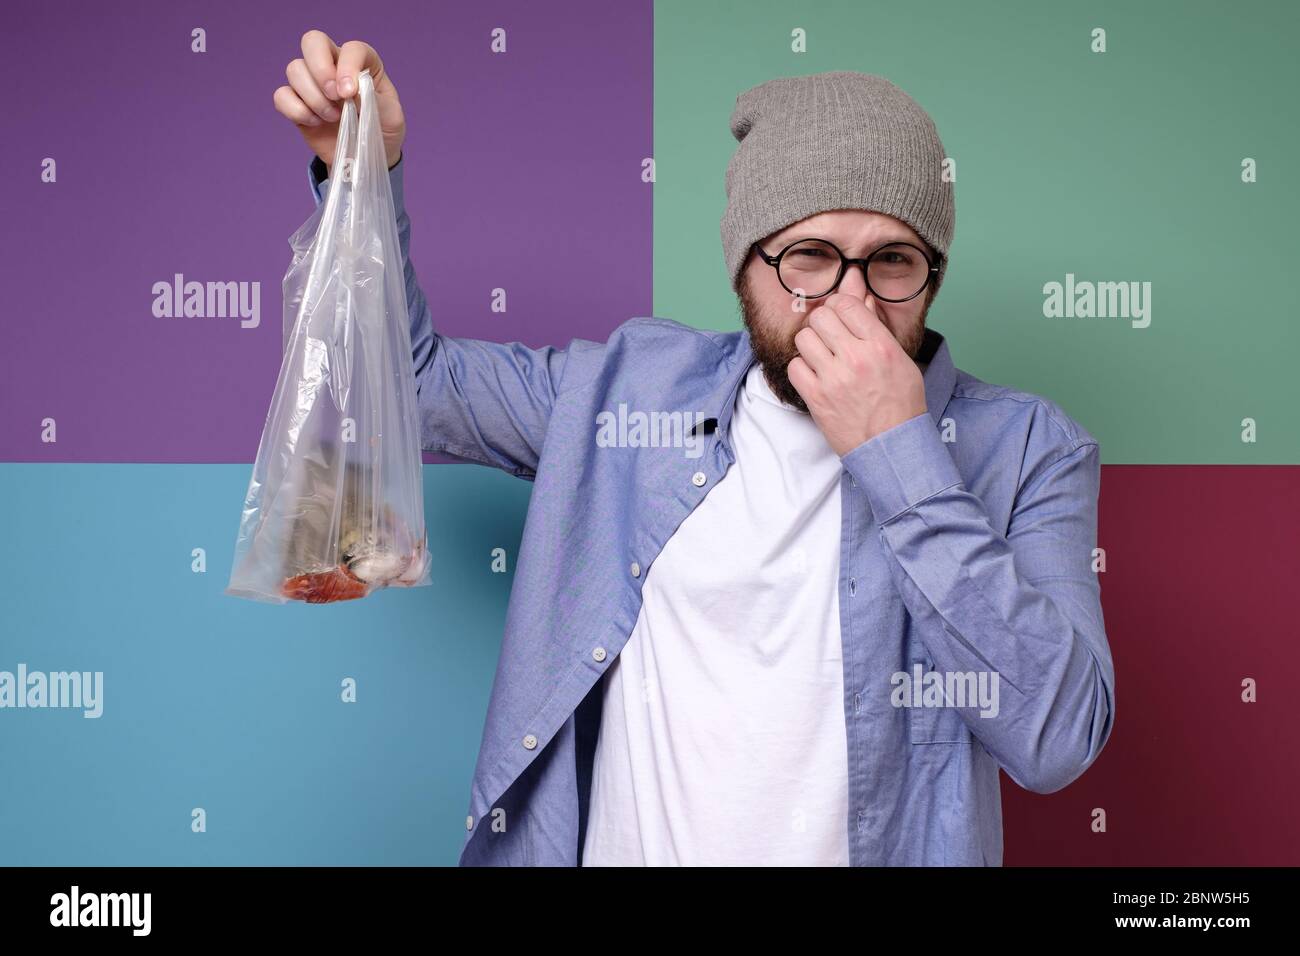 Caucasian man holds a stinky, spoiled fish in a transparent package and pinches nose with his fingers due to an unpleasant odor. Stock Photo